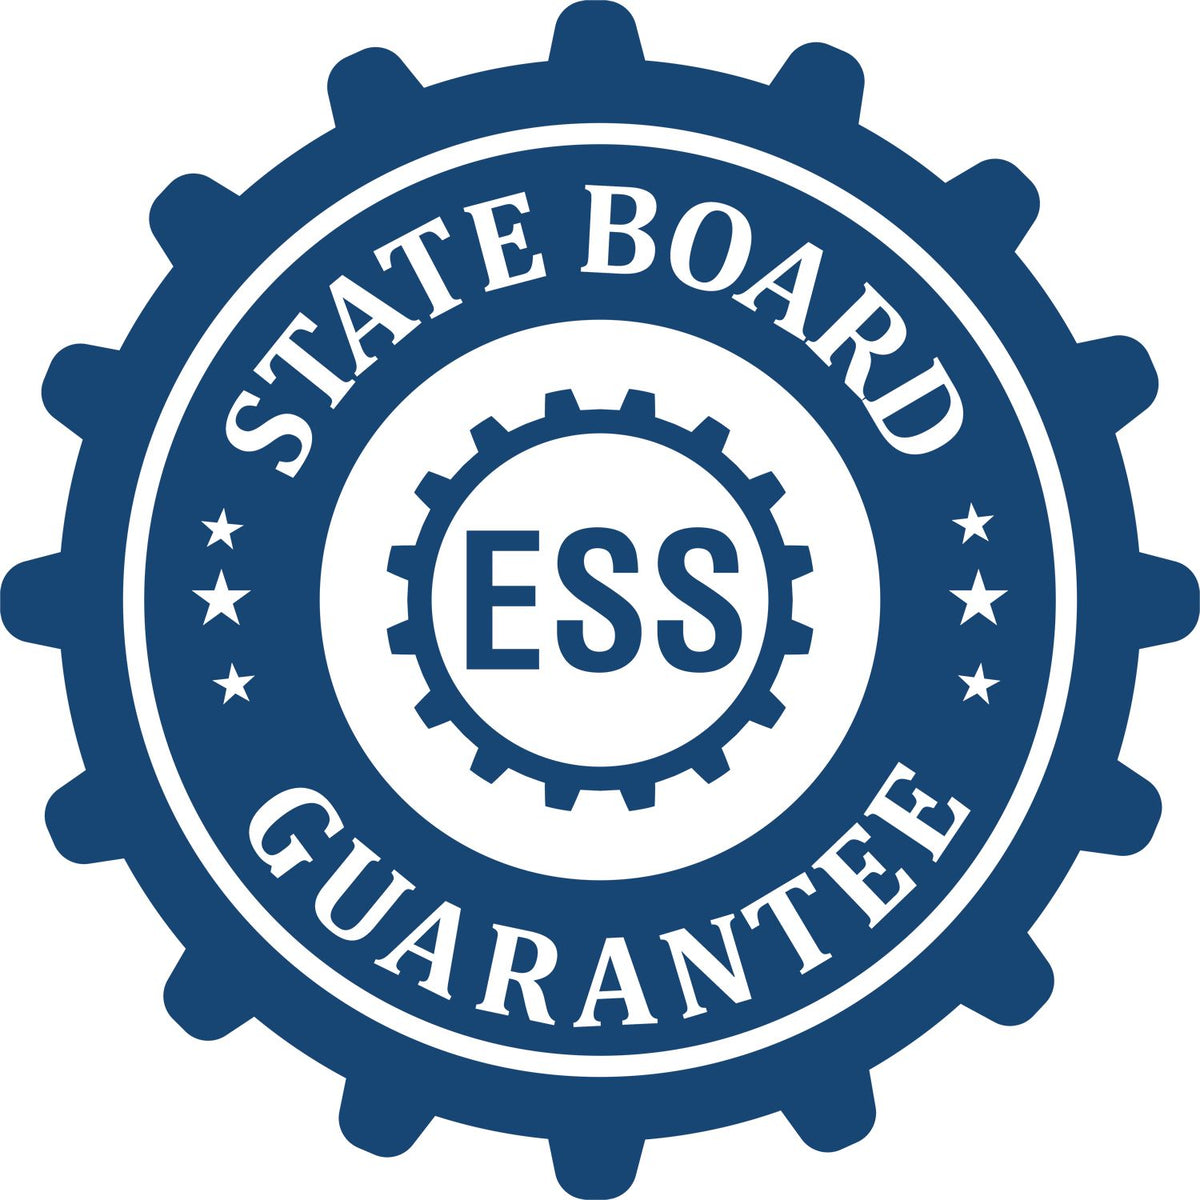 An emblem in a gear shape illustrating a state board guarantee for the Soft Vermont Professional Engineer Seal product.